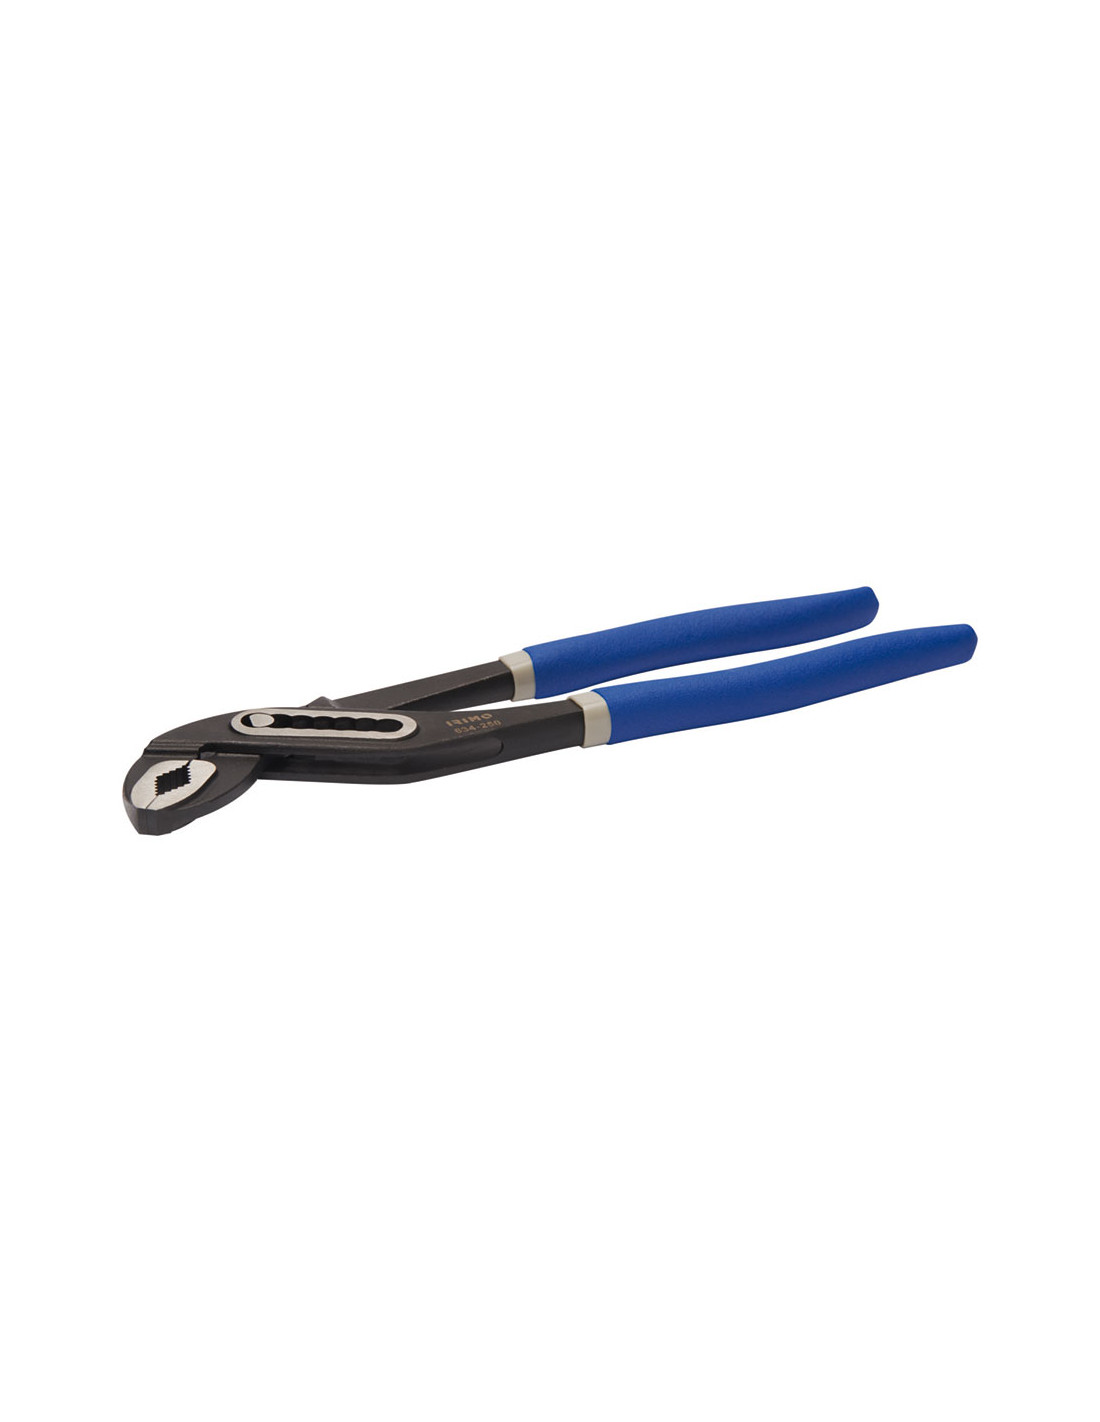 Pince A Ajustement Rapide Picoloro Oeillet 240mm 634-250-1 Irimo - 20409